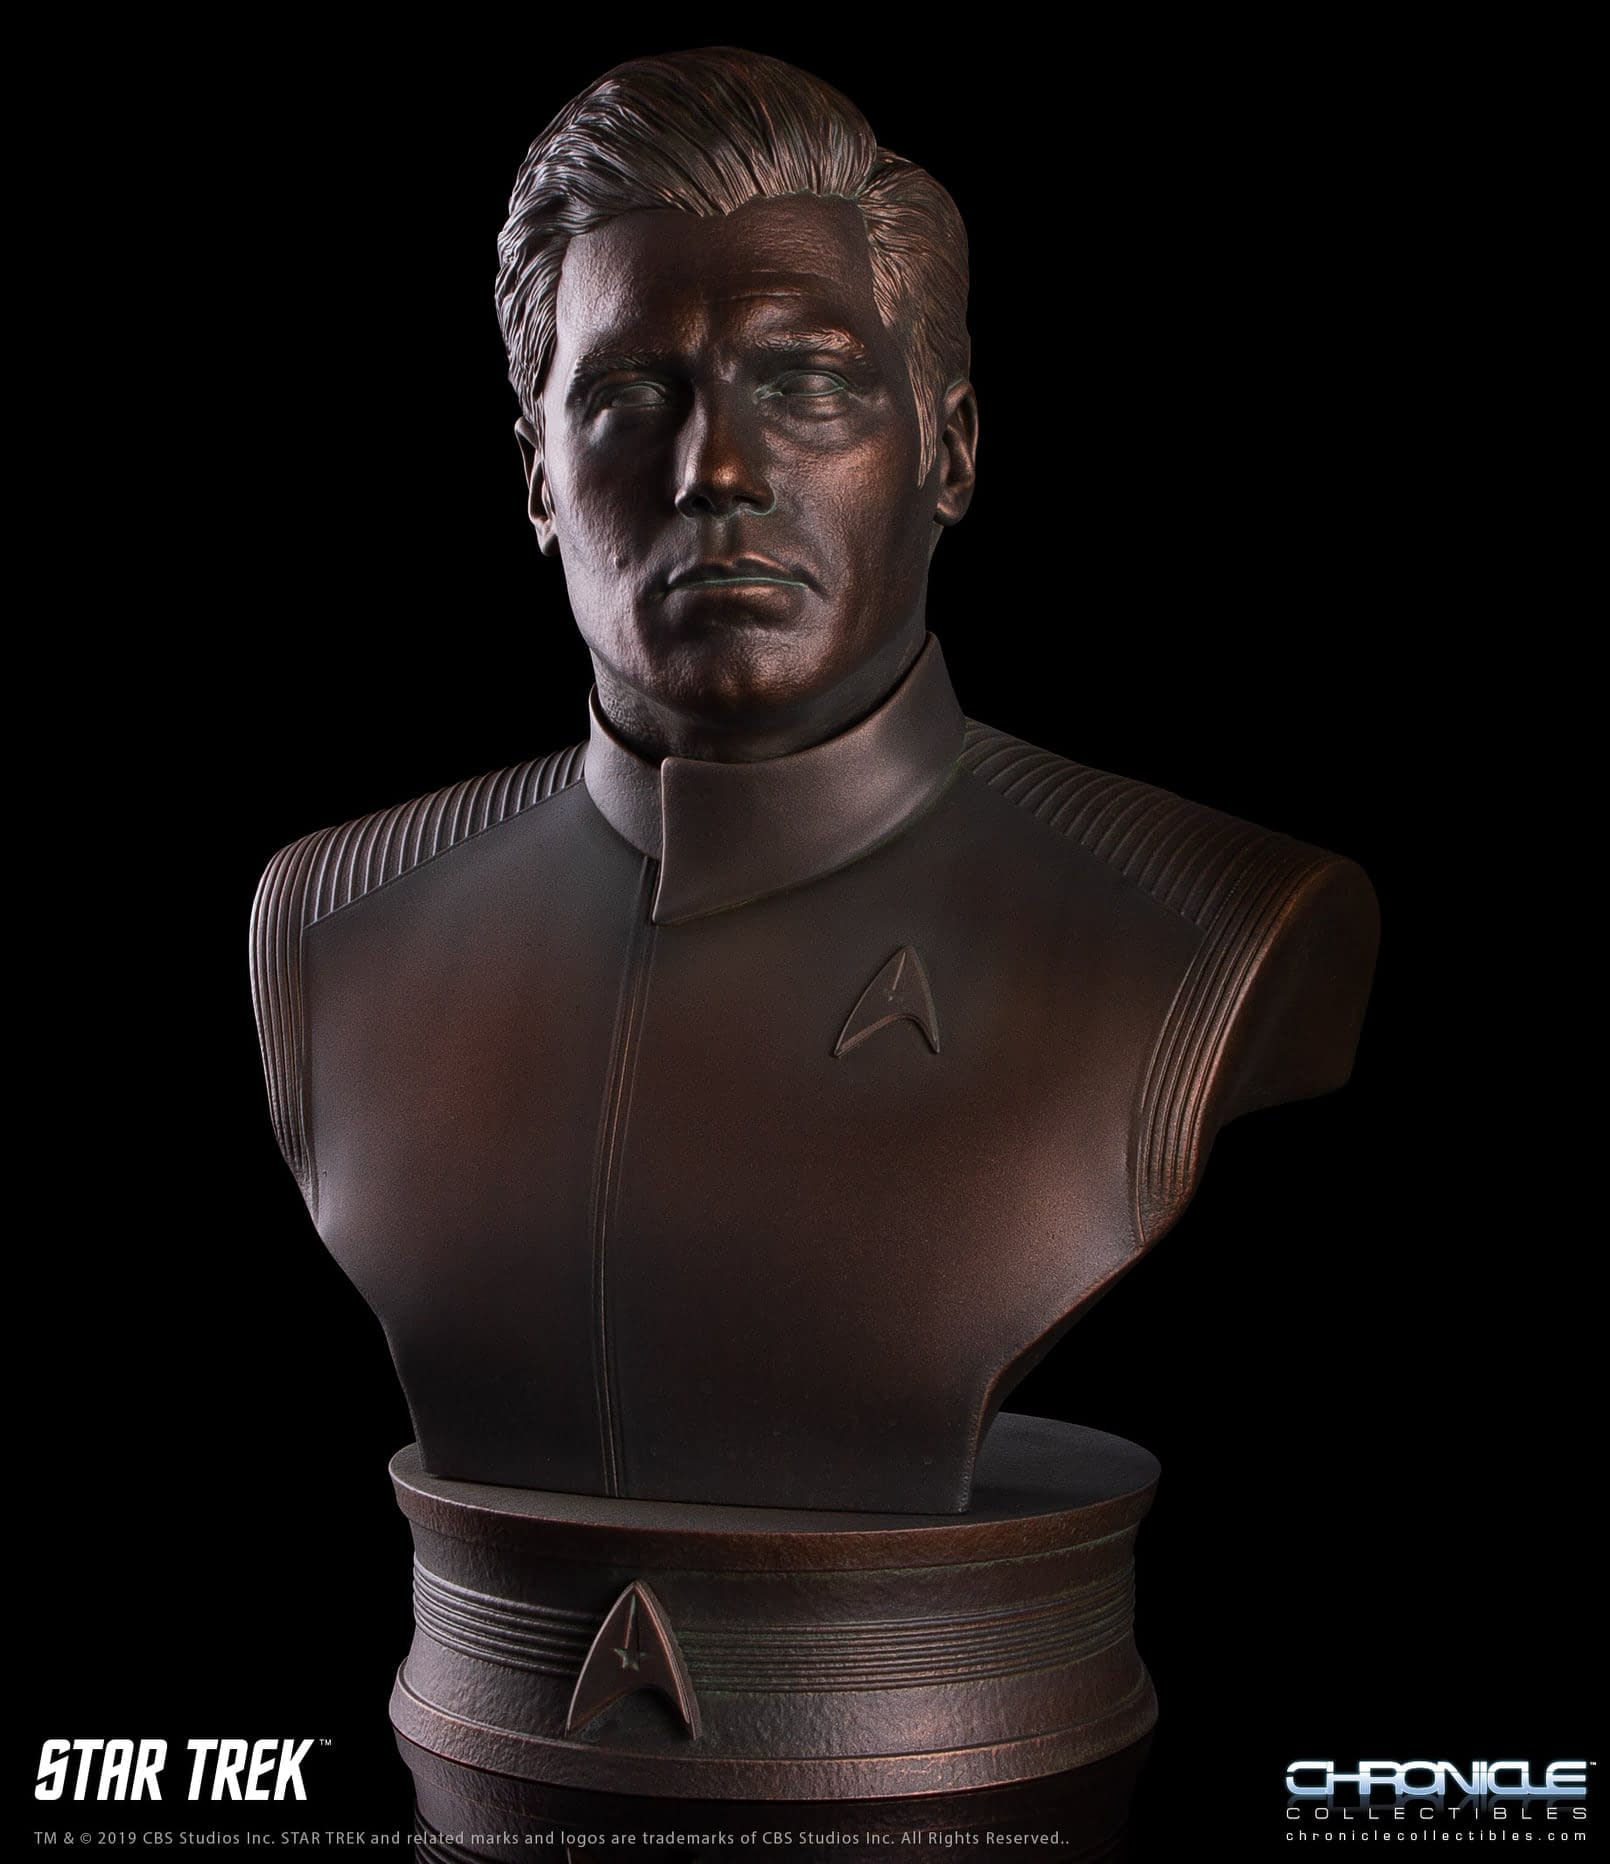 Star Trek Busts Are Here for You to Discover